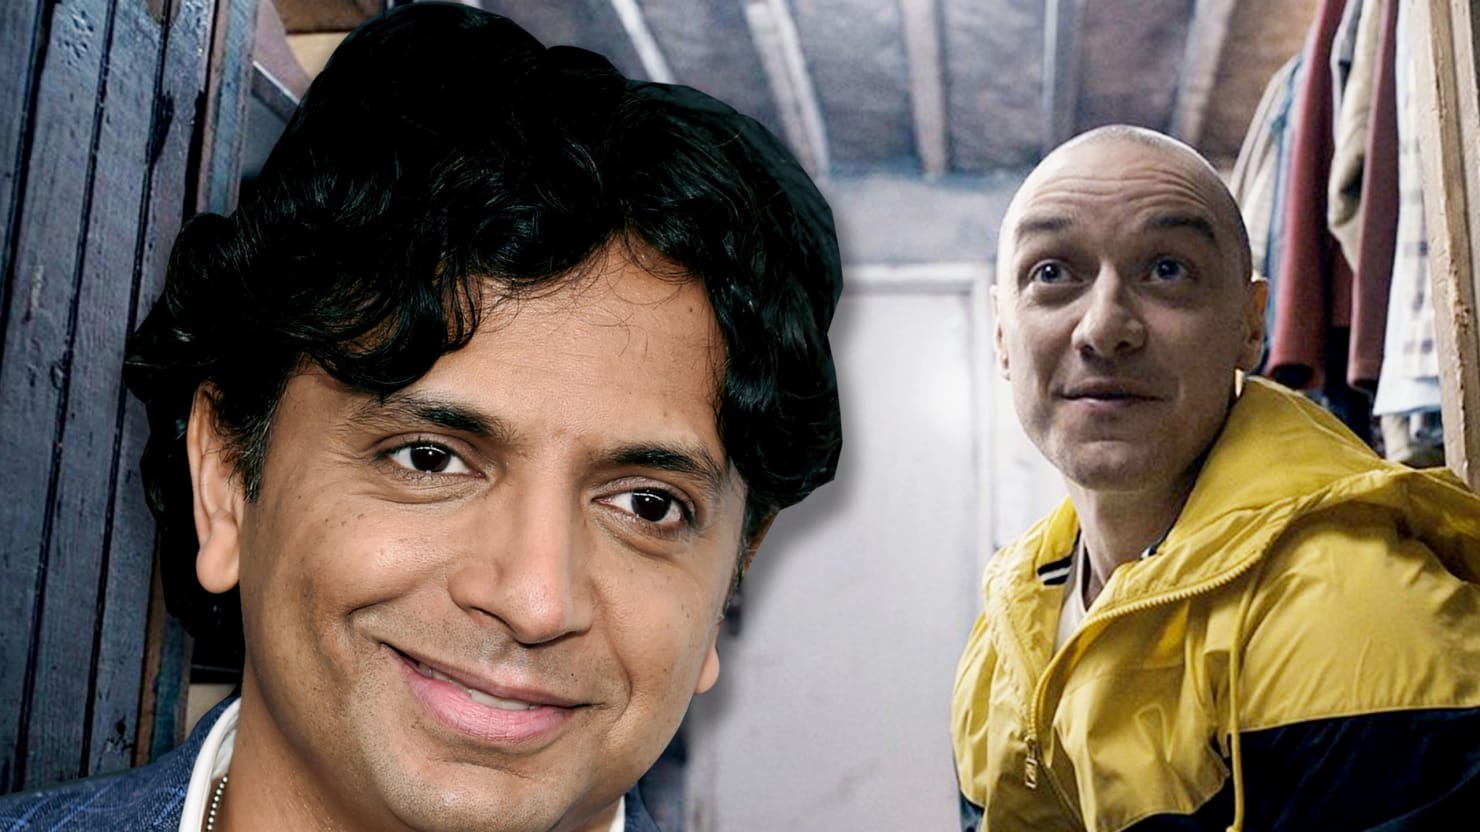 An M Night Shyamalan comeback? Now that's a twist no one saw coming